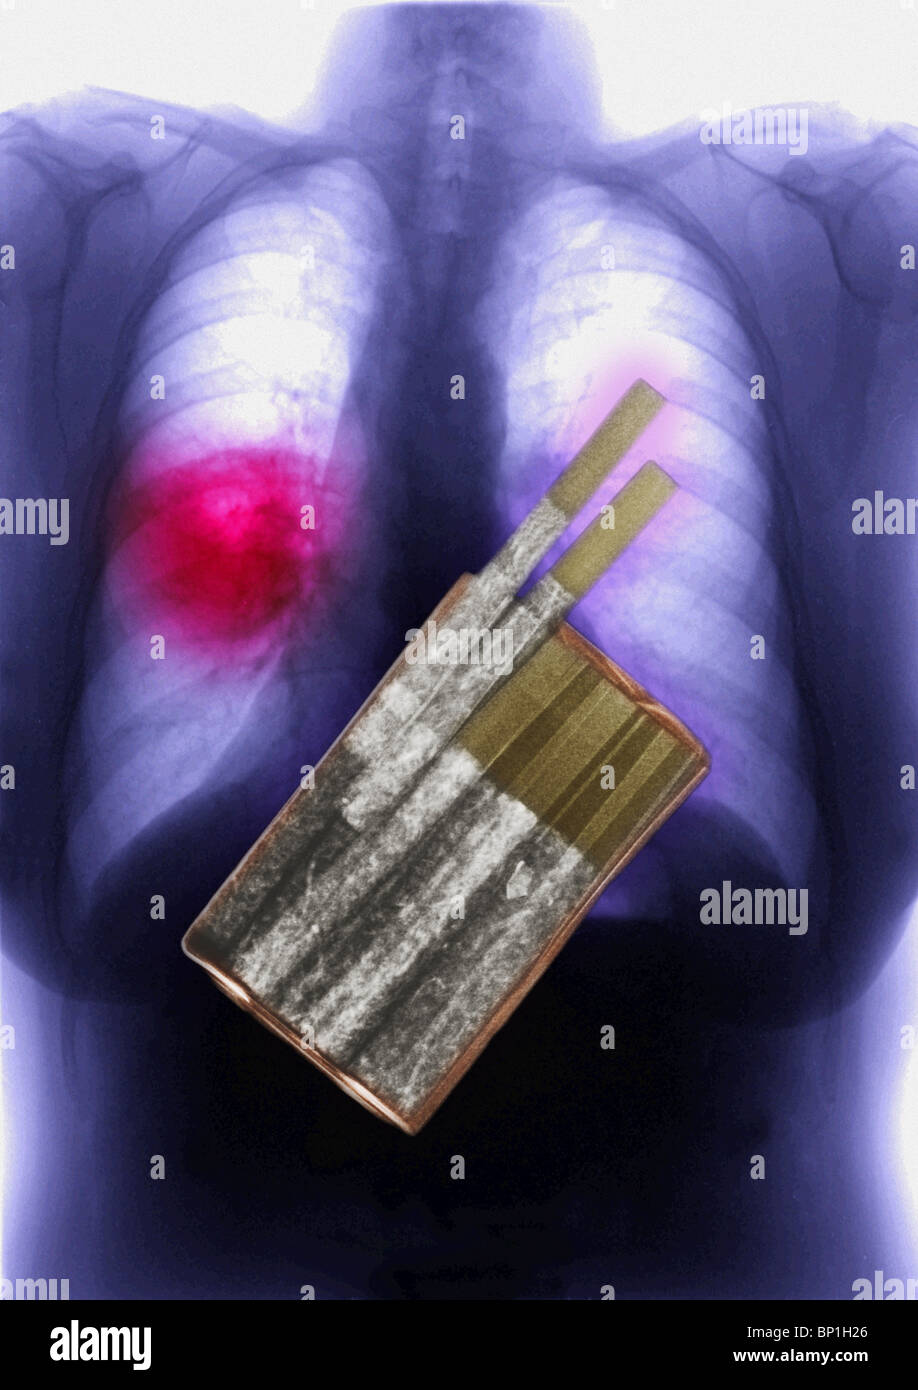 illustration of an x-ray of a pack of cigarettes superimposed over a chest x-ray showing lung cancer Stock Photo